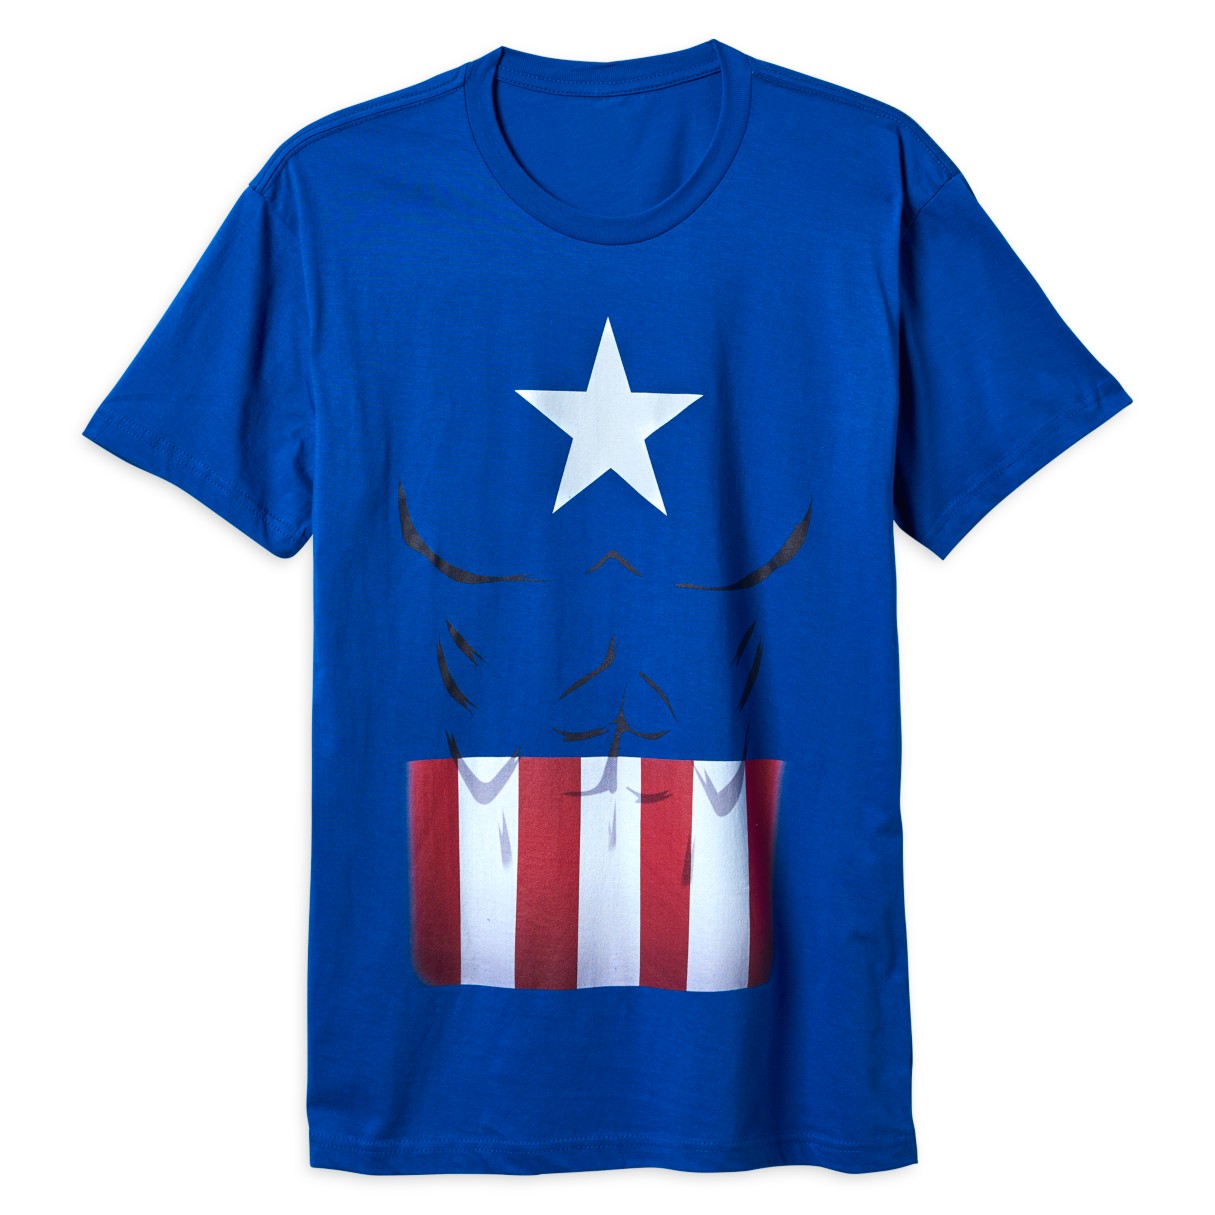 Captain America Costume T-Shirt for Adults